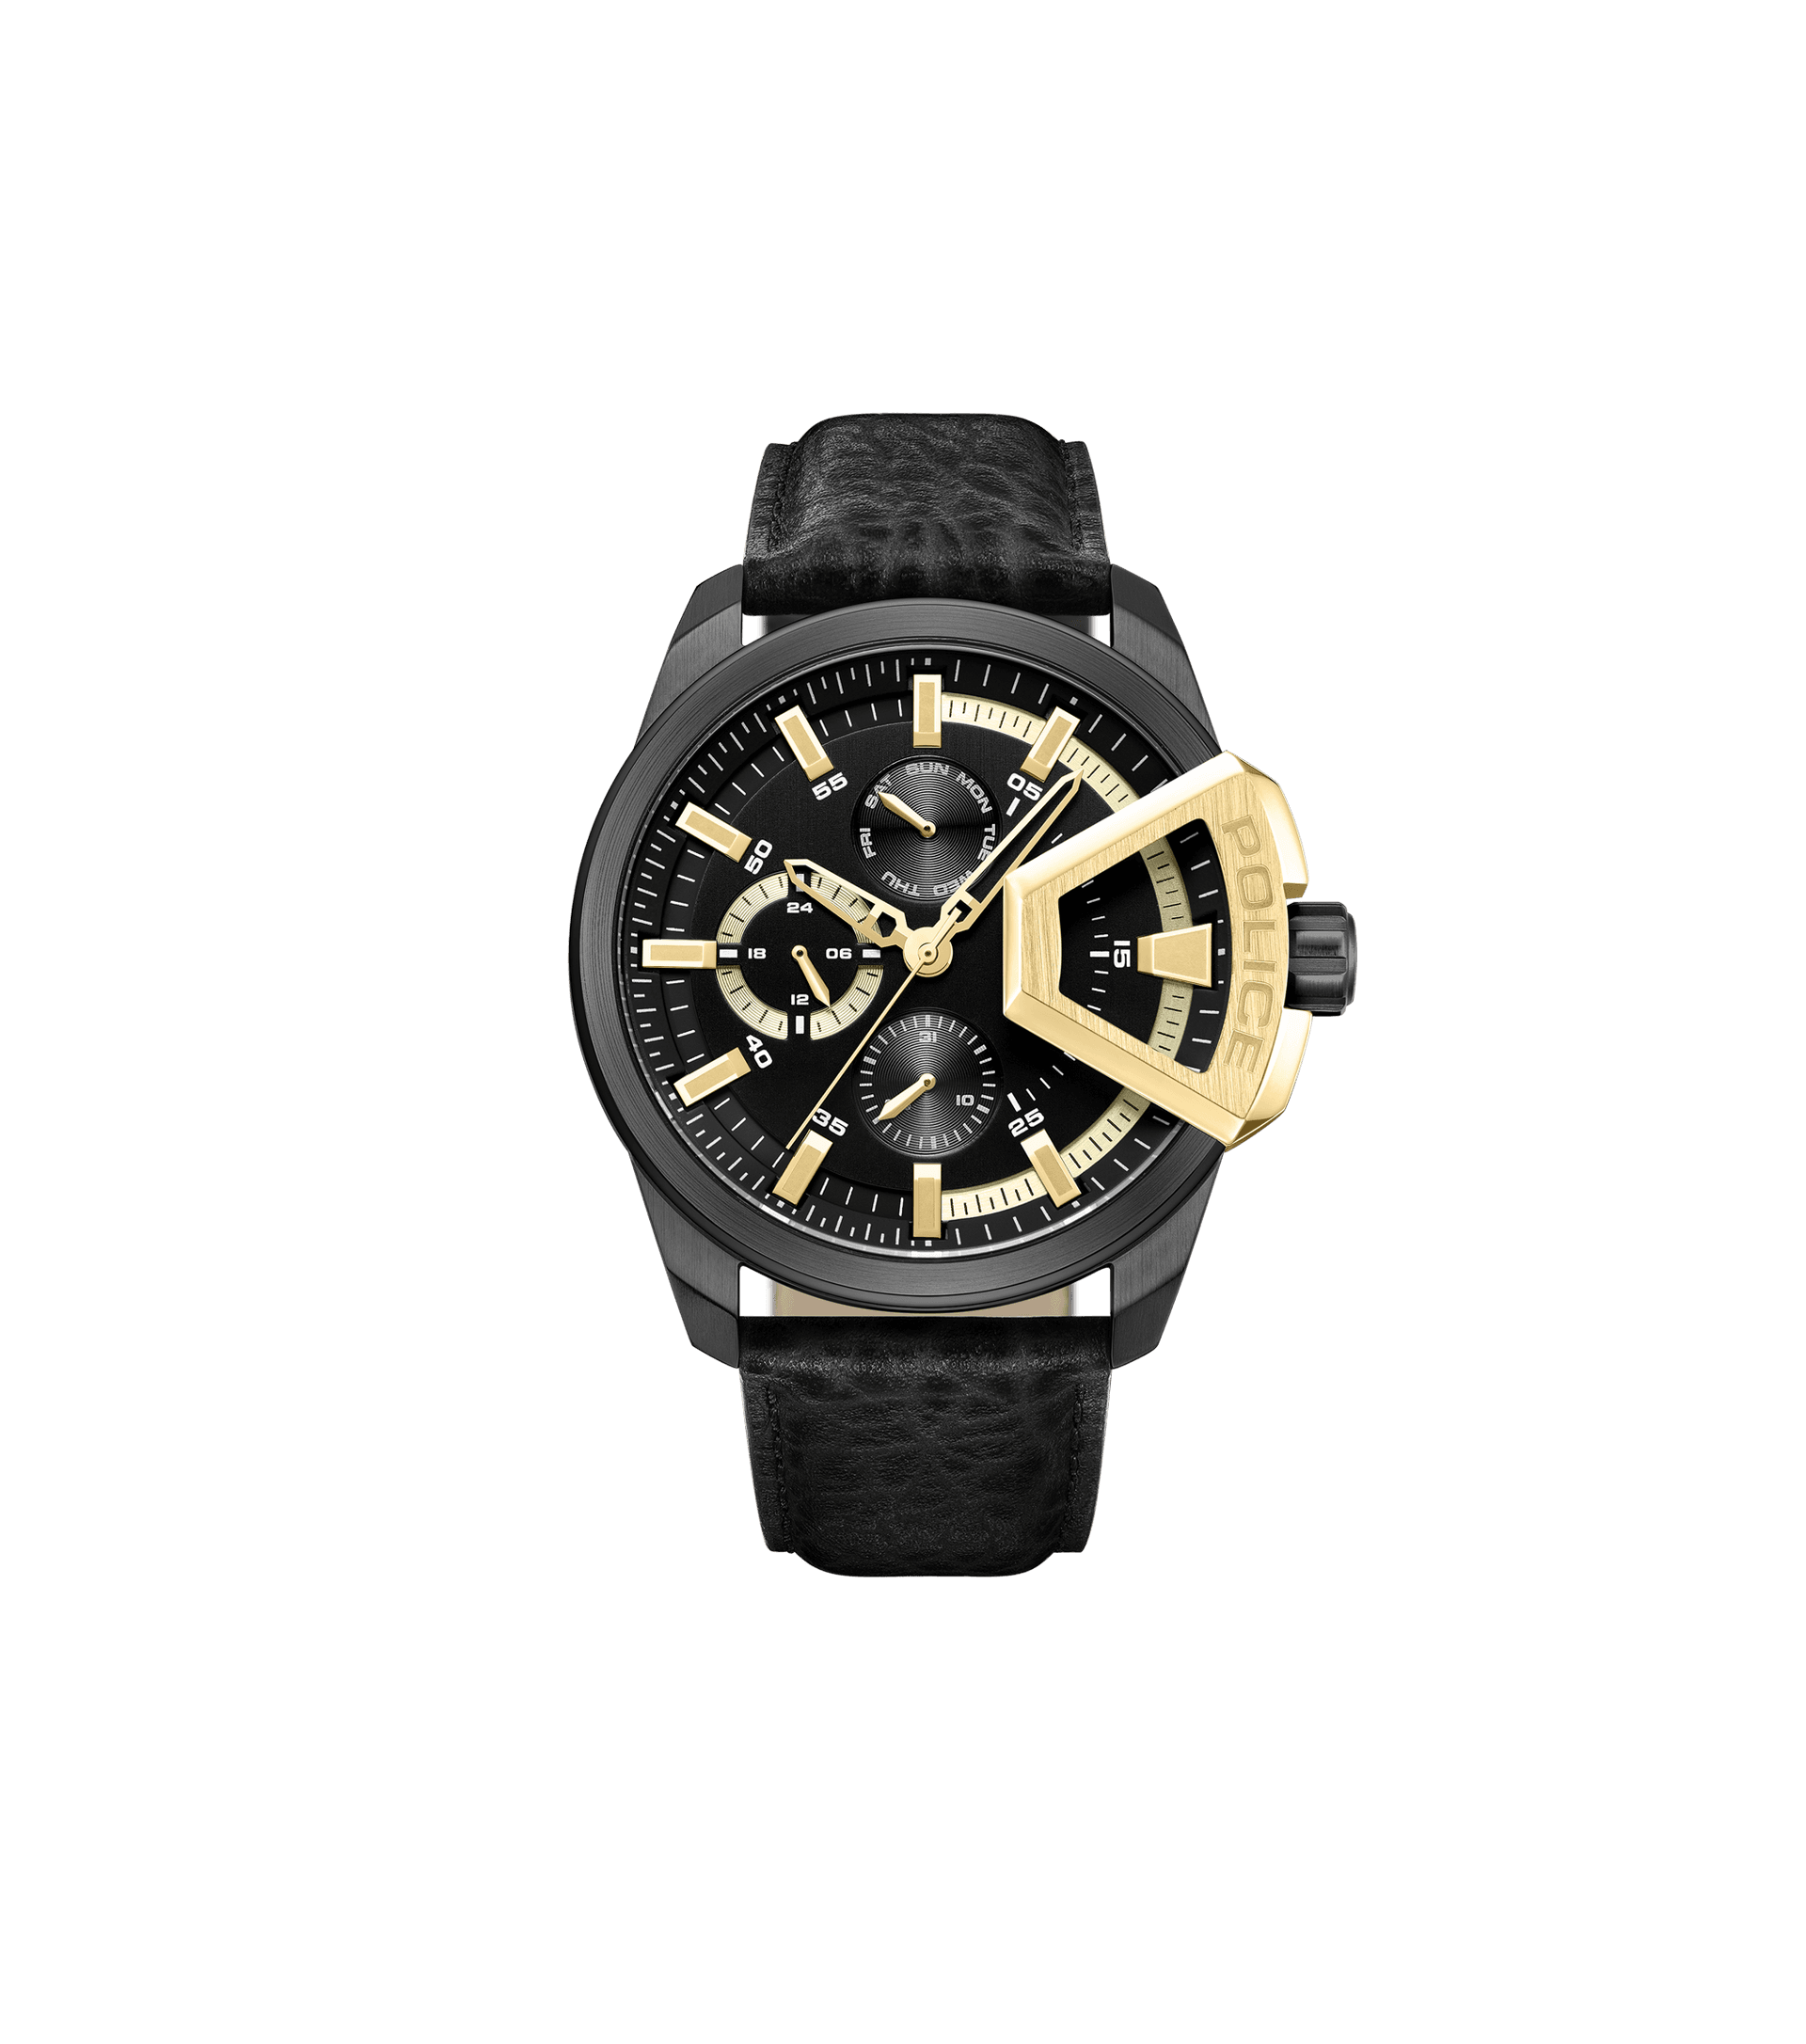 Police watches - The Anniversary Bracelet Black Gold, And Collection Police Watch Set Gift By Men Black, For